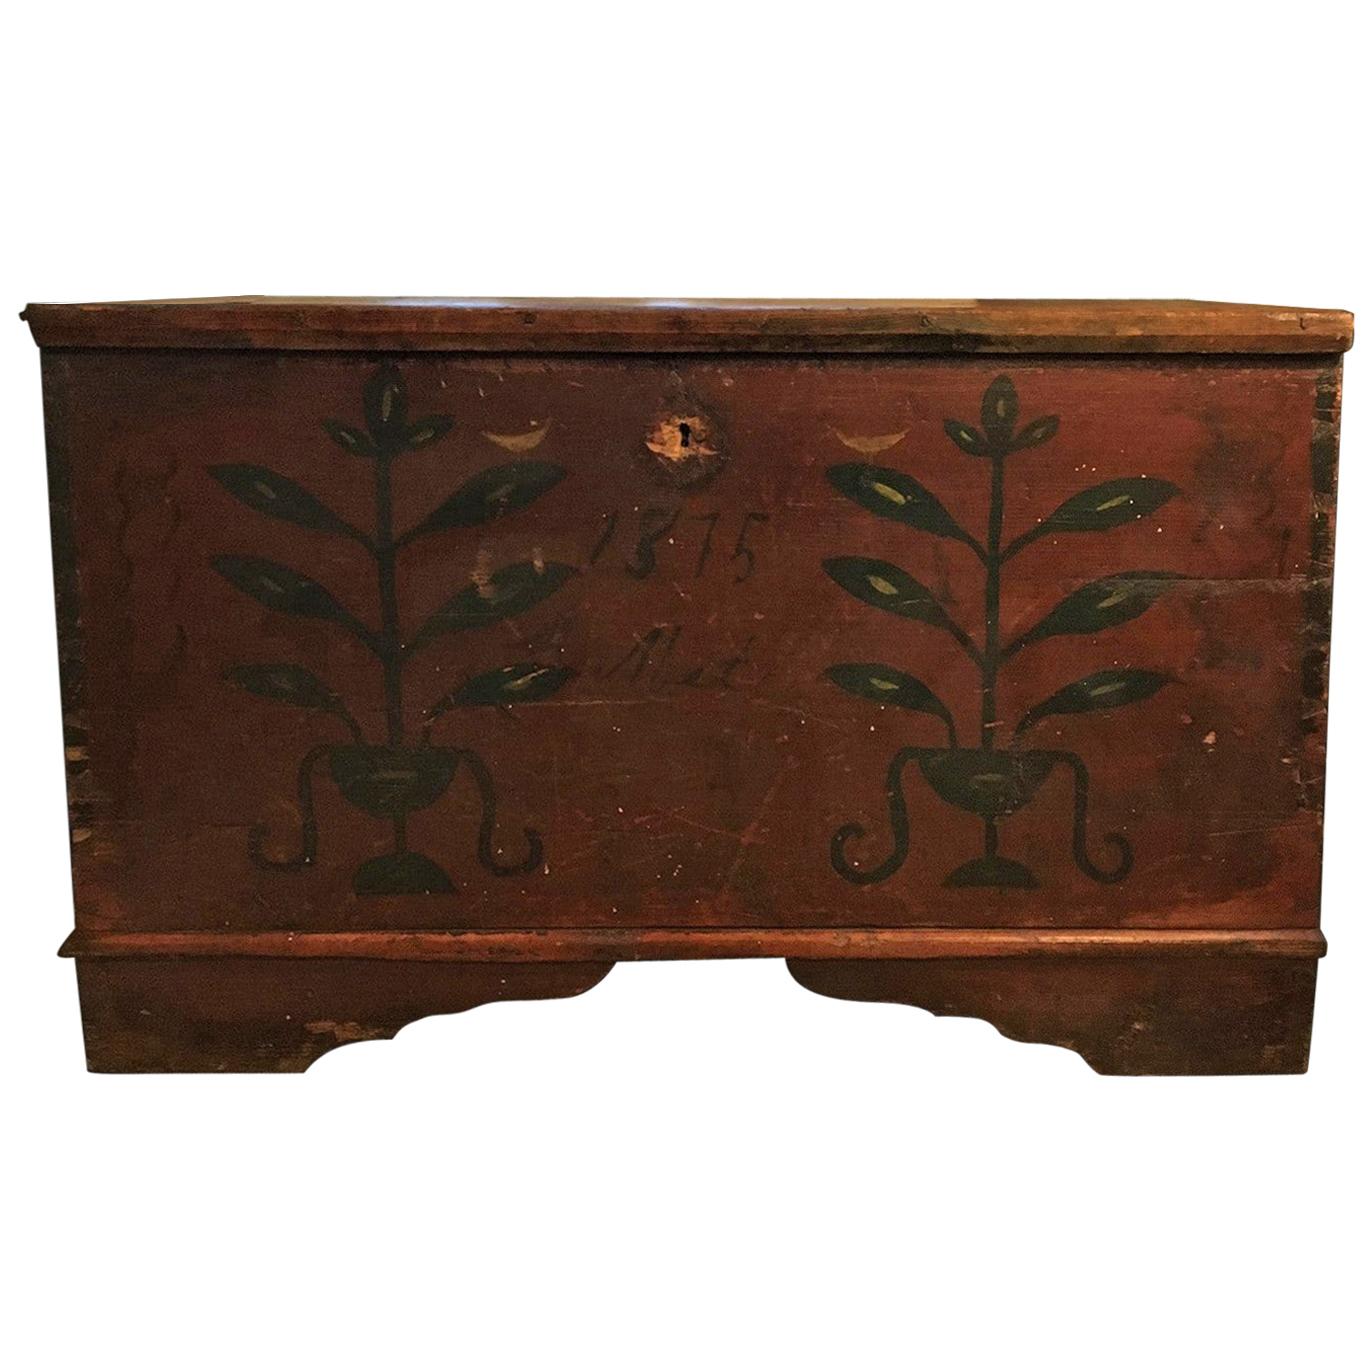 18th Century American Pine Decorated Blanket Chest For Sale